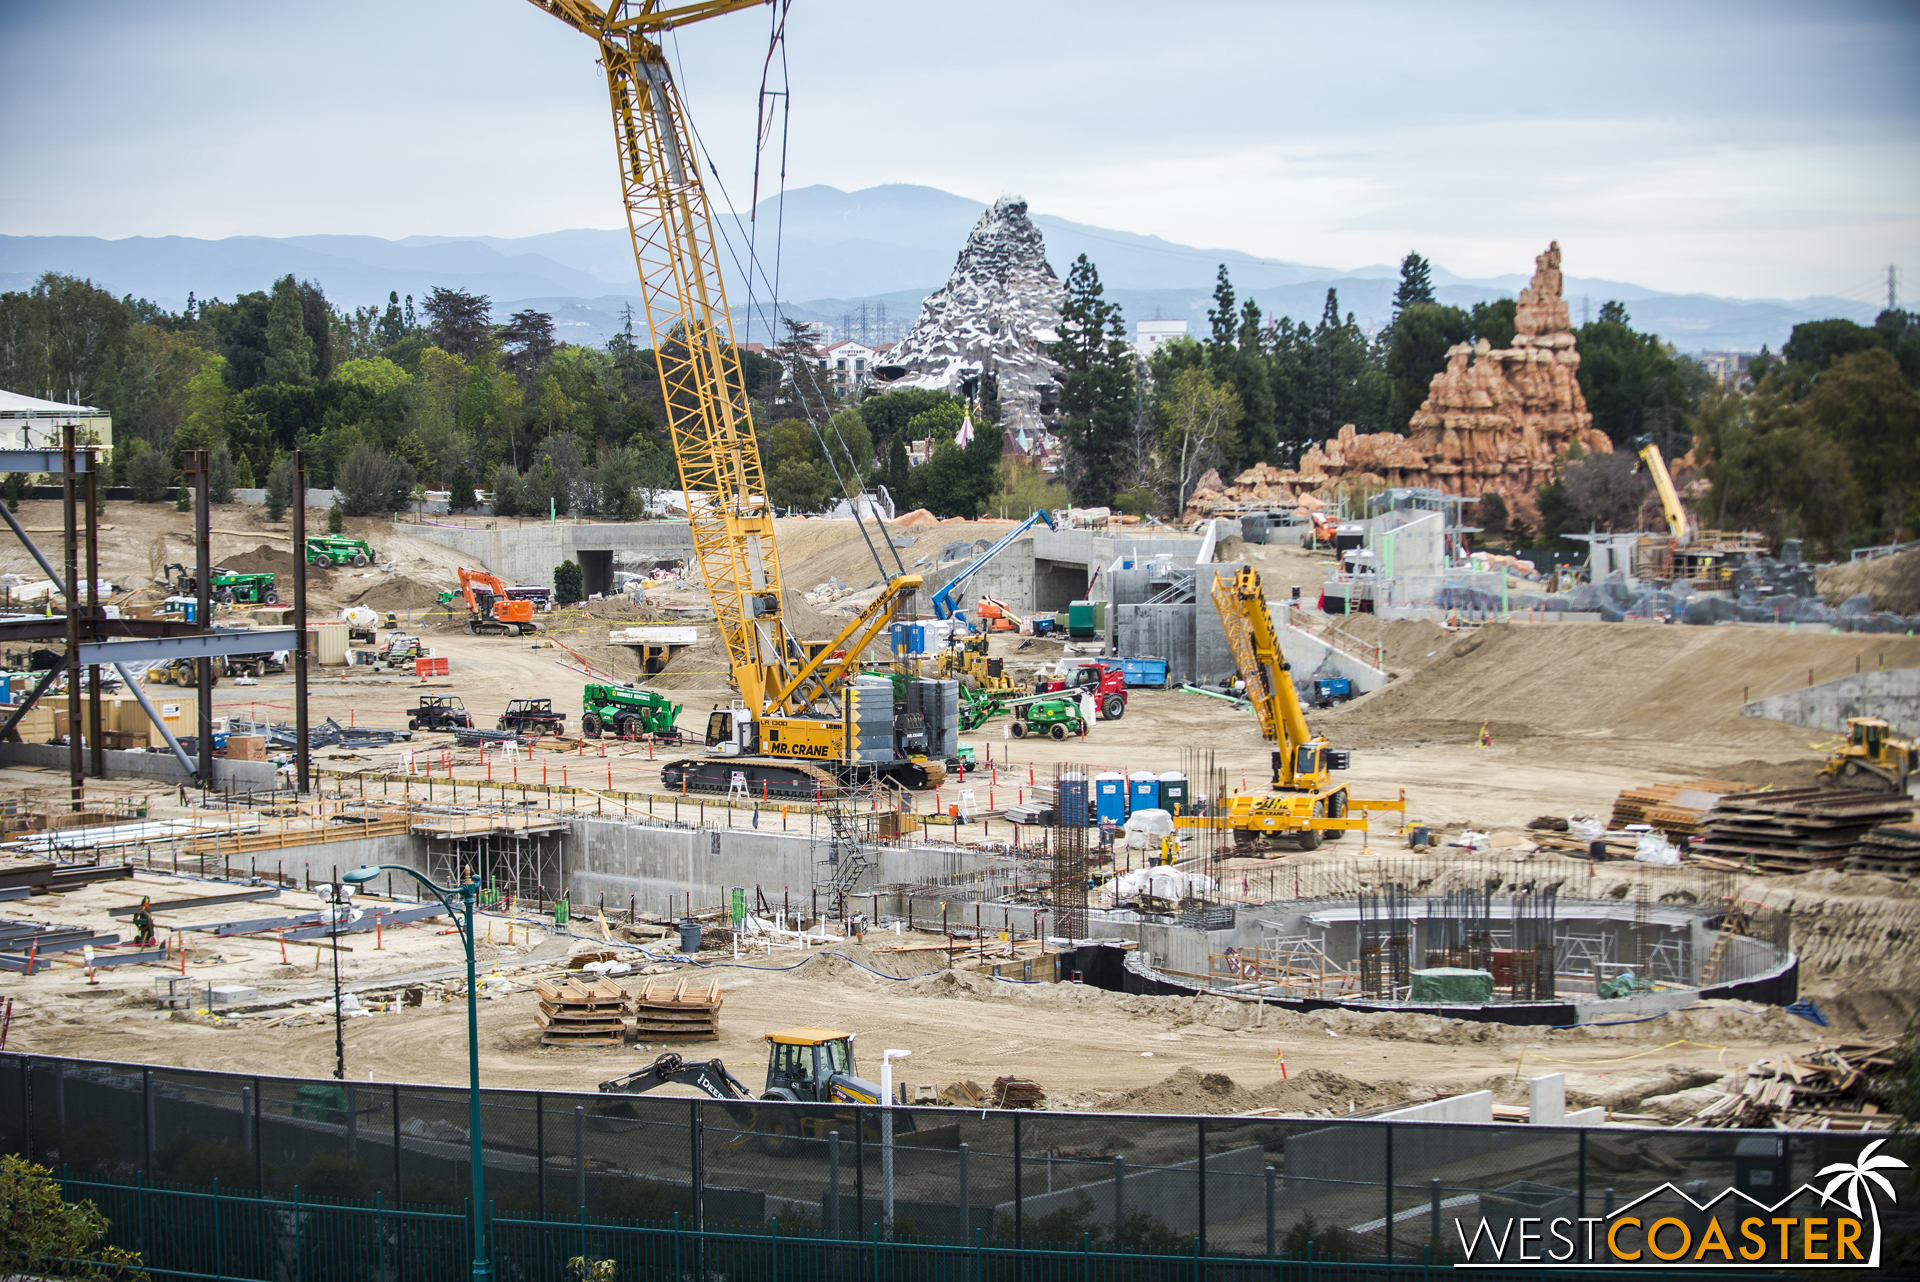  Concrete work continues advance at the "trench" and "pit' areas of the future E-Ticket. 